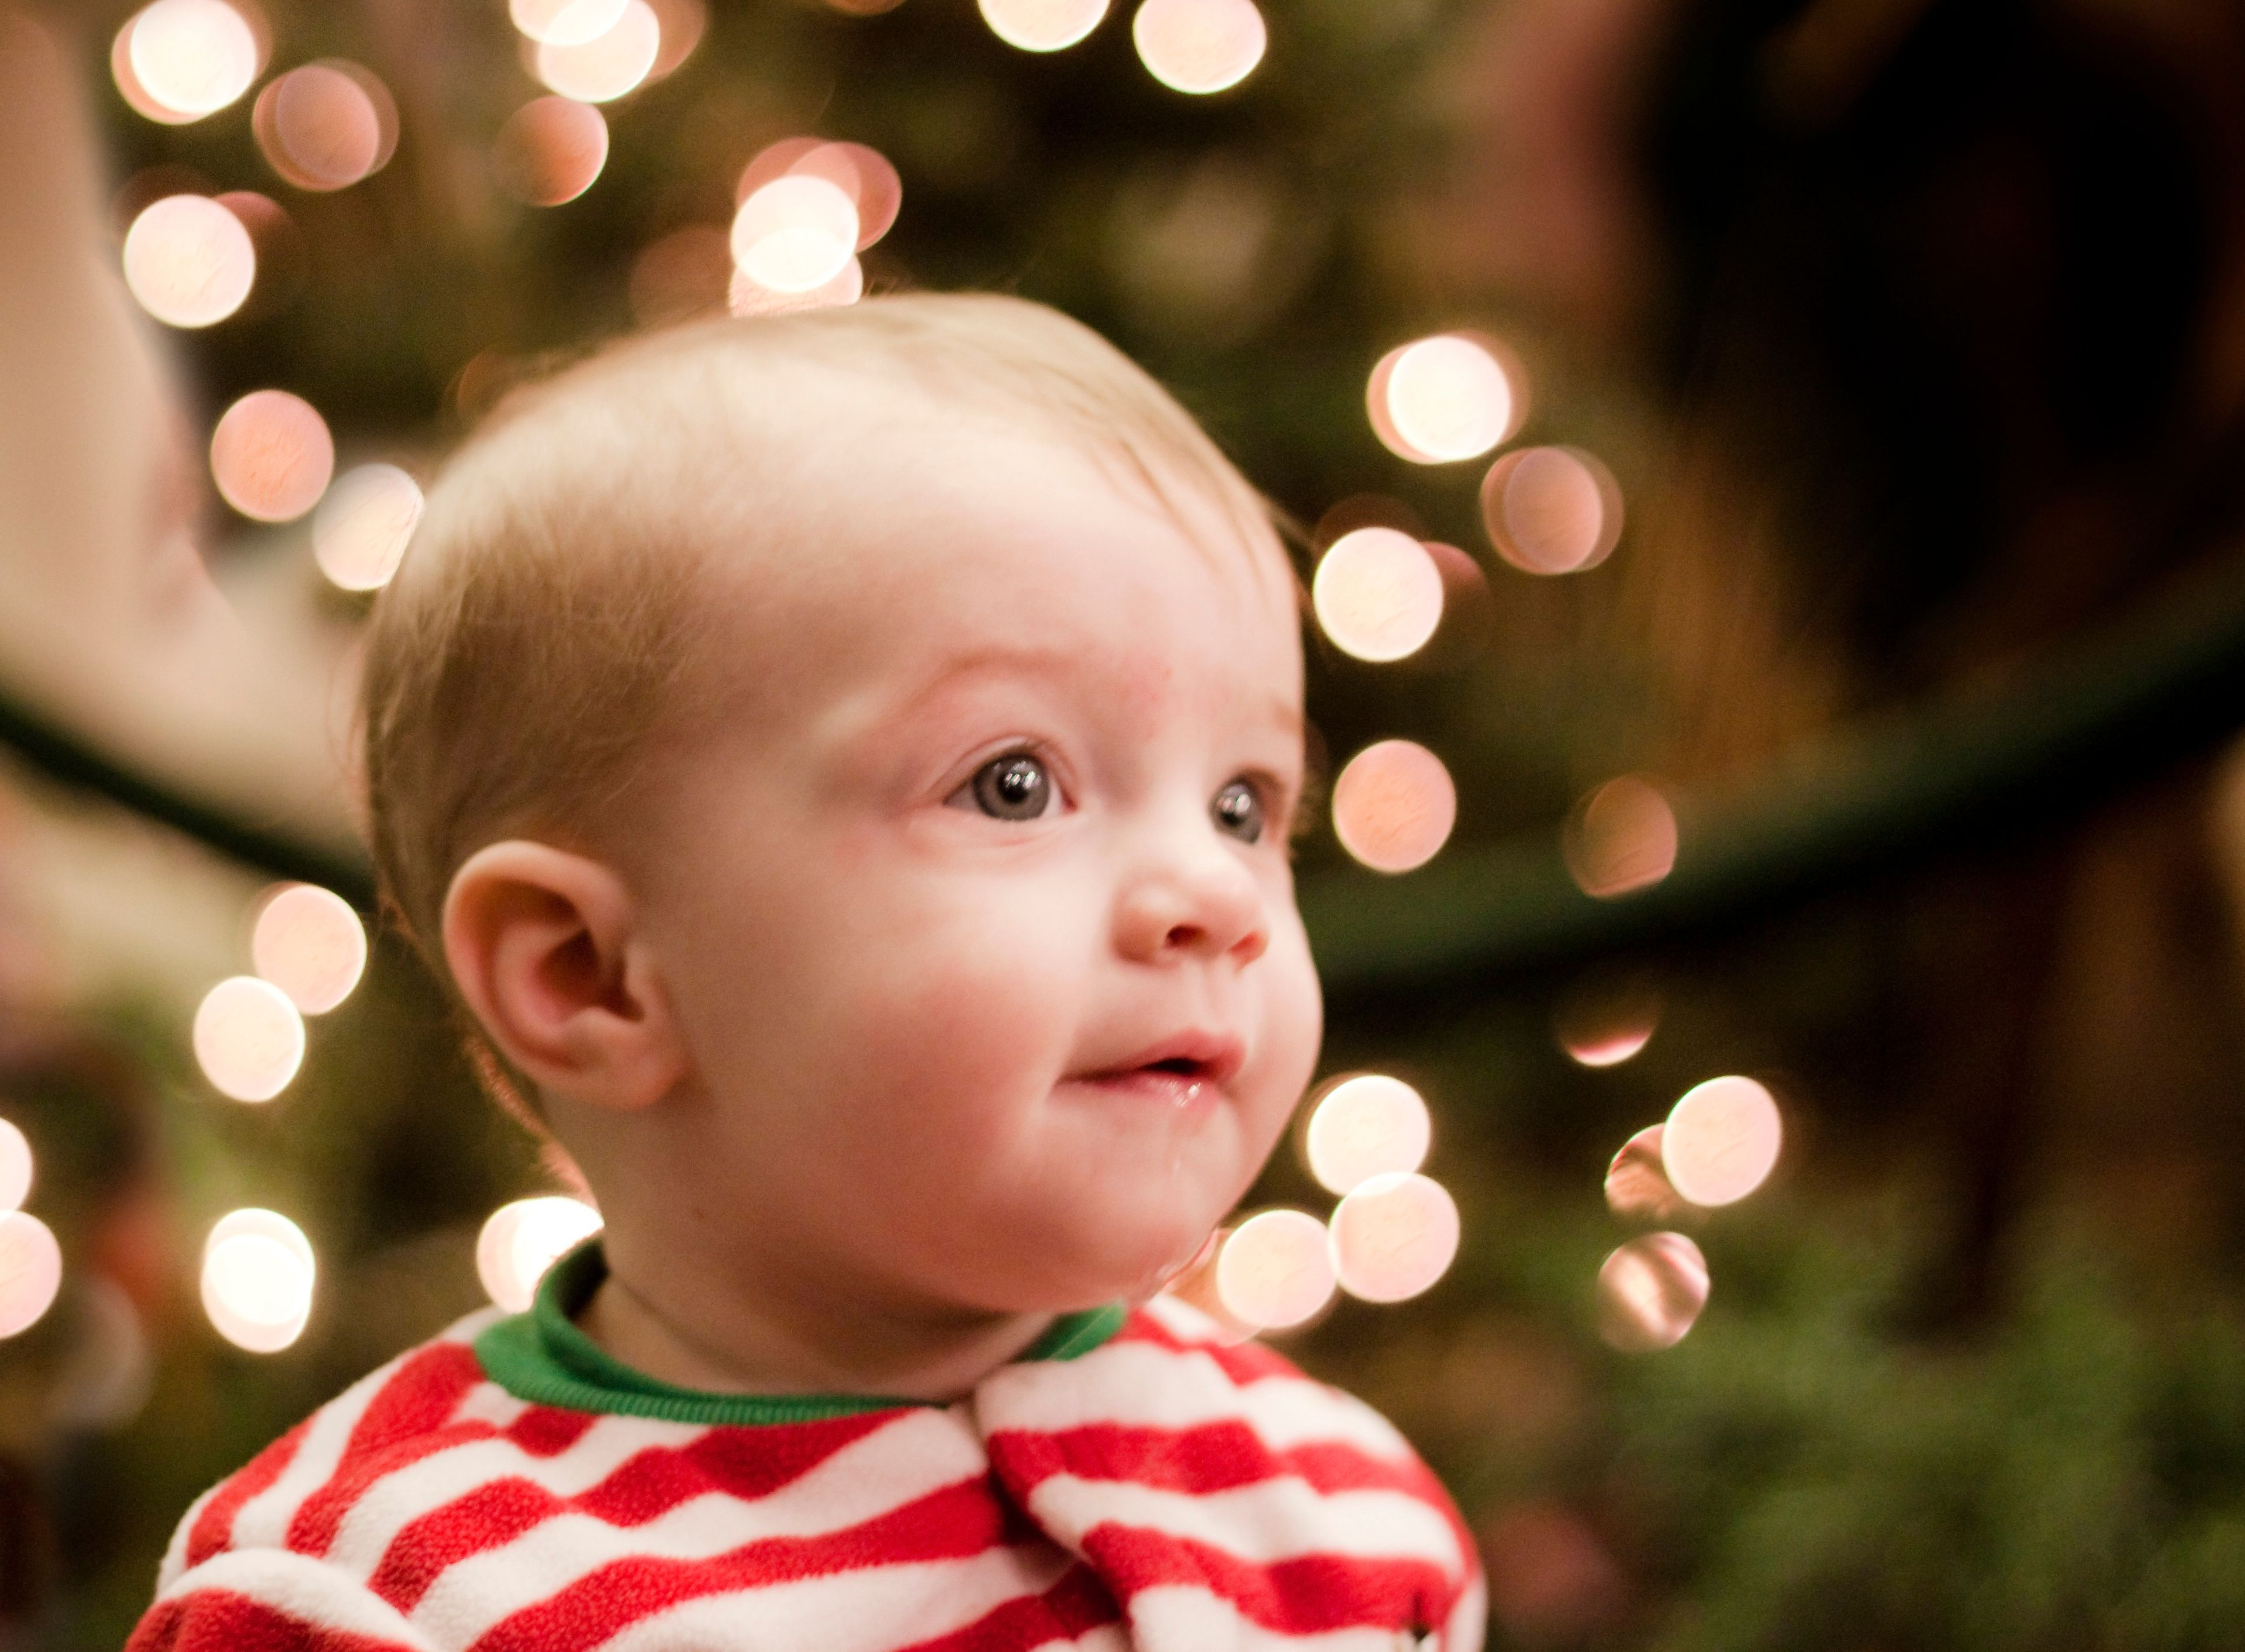 A baby in red, white, and green pajamas sitting near a Christmas tree.